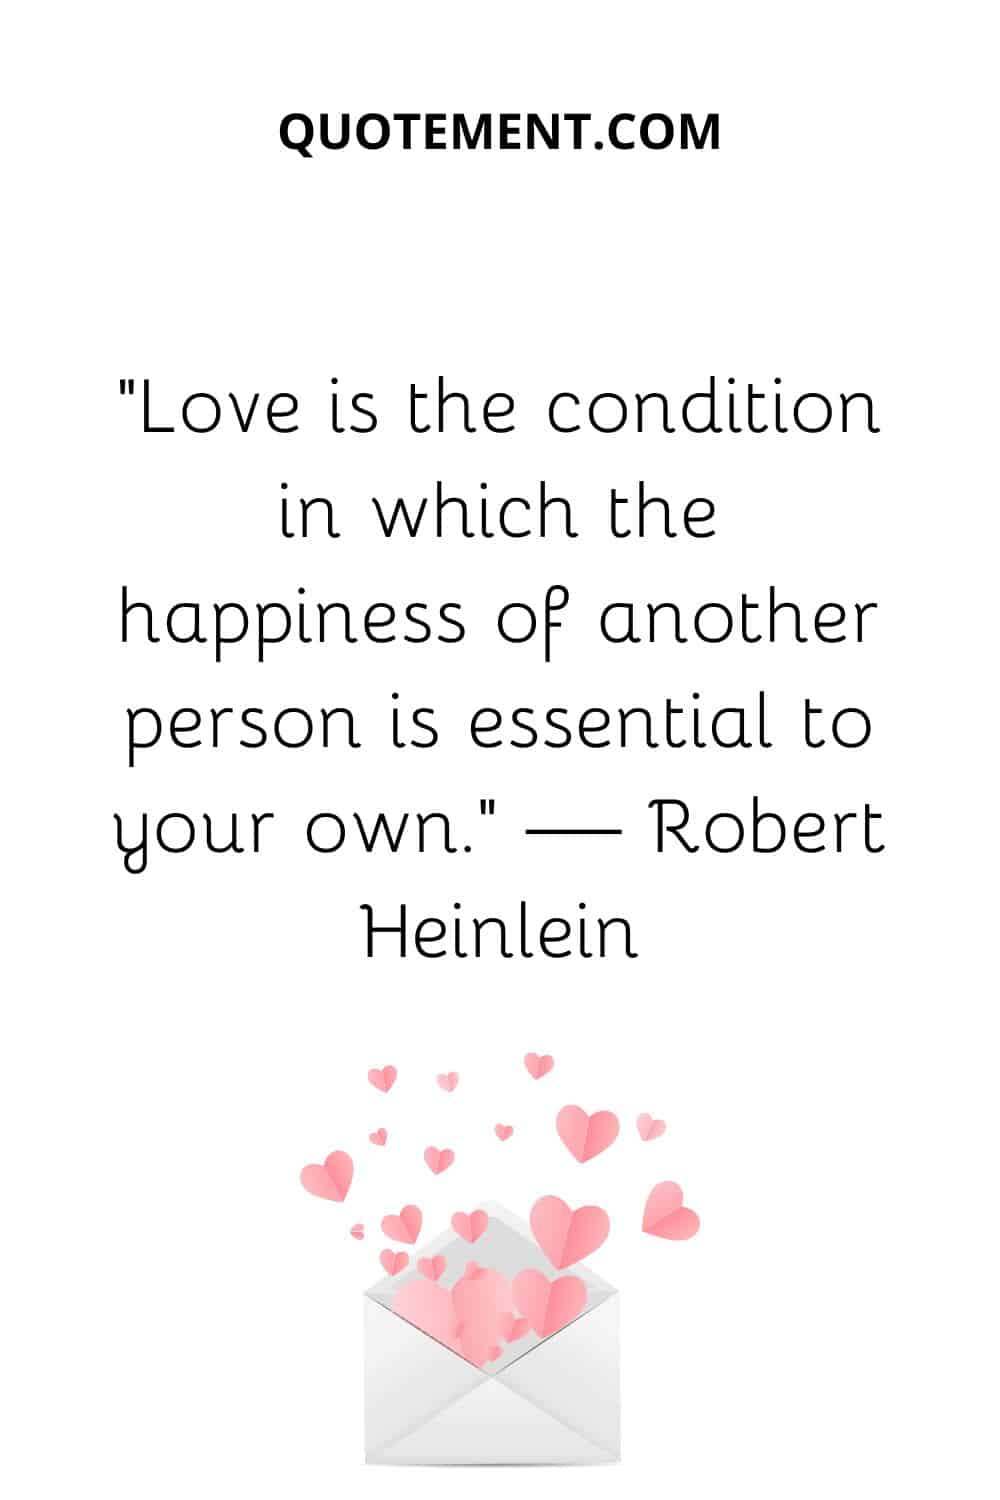 “Love is the condition in which the happiness of another person is essential to your own.” — Robert Heinlein